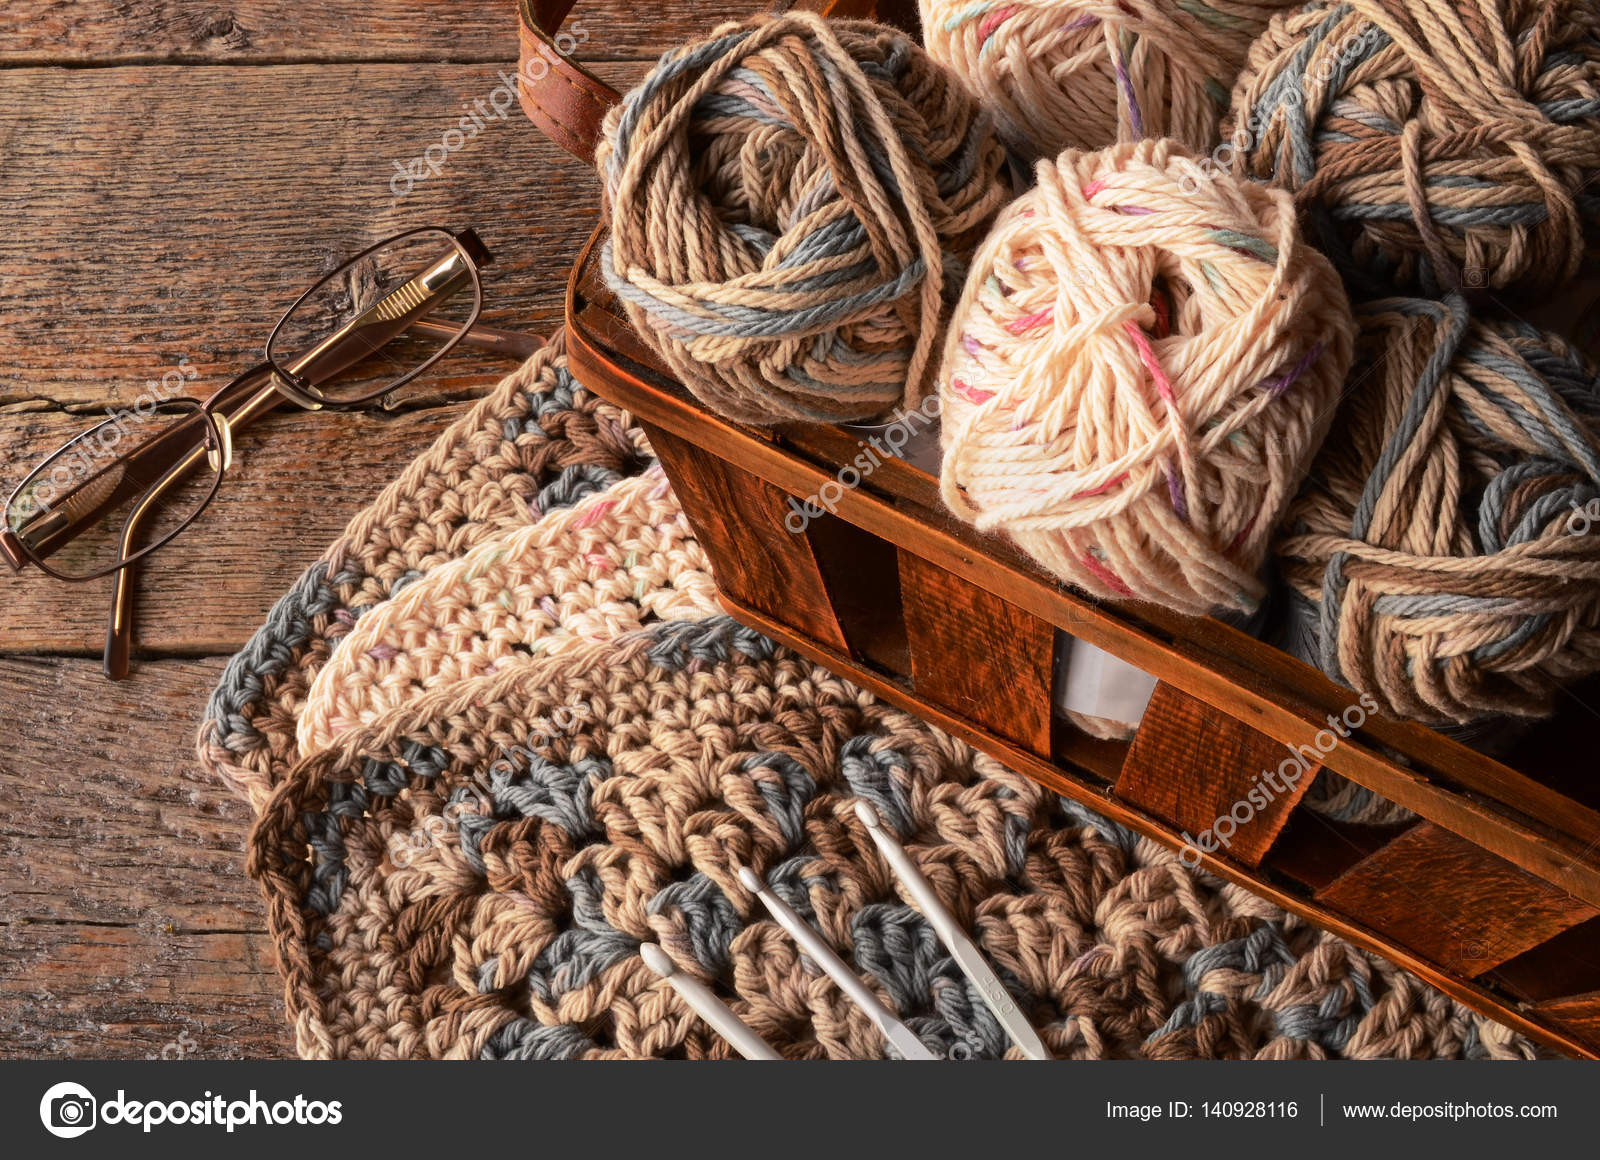 163,851 Crochet Yarn Royalty-Free Photos and Stock Images